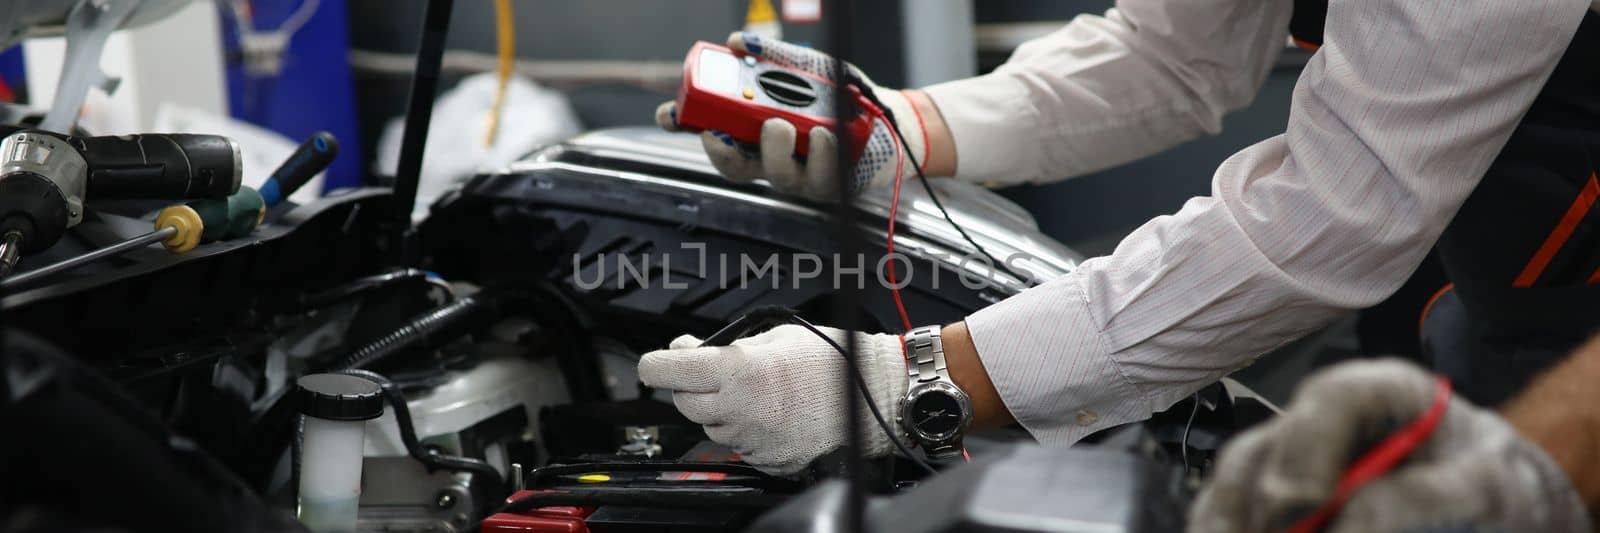 Car repair technicians use voltage multimeter to work in auto repair shops by kuprevich